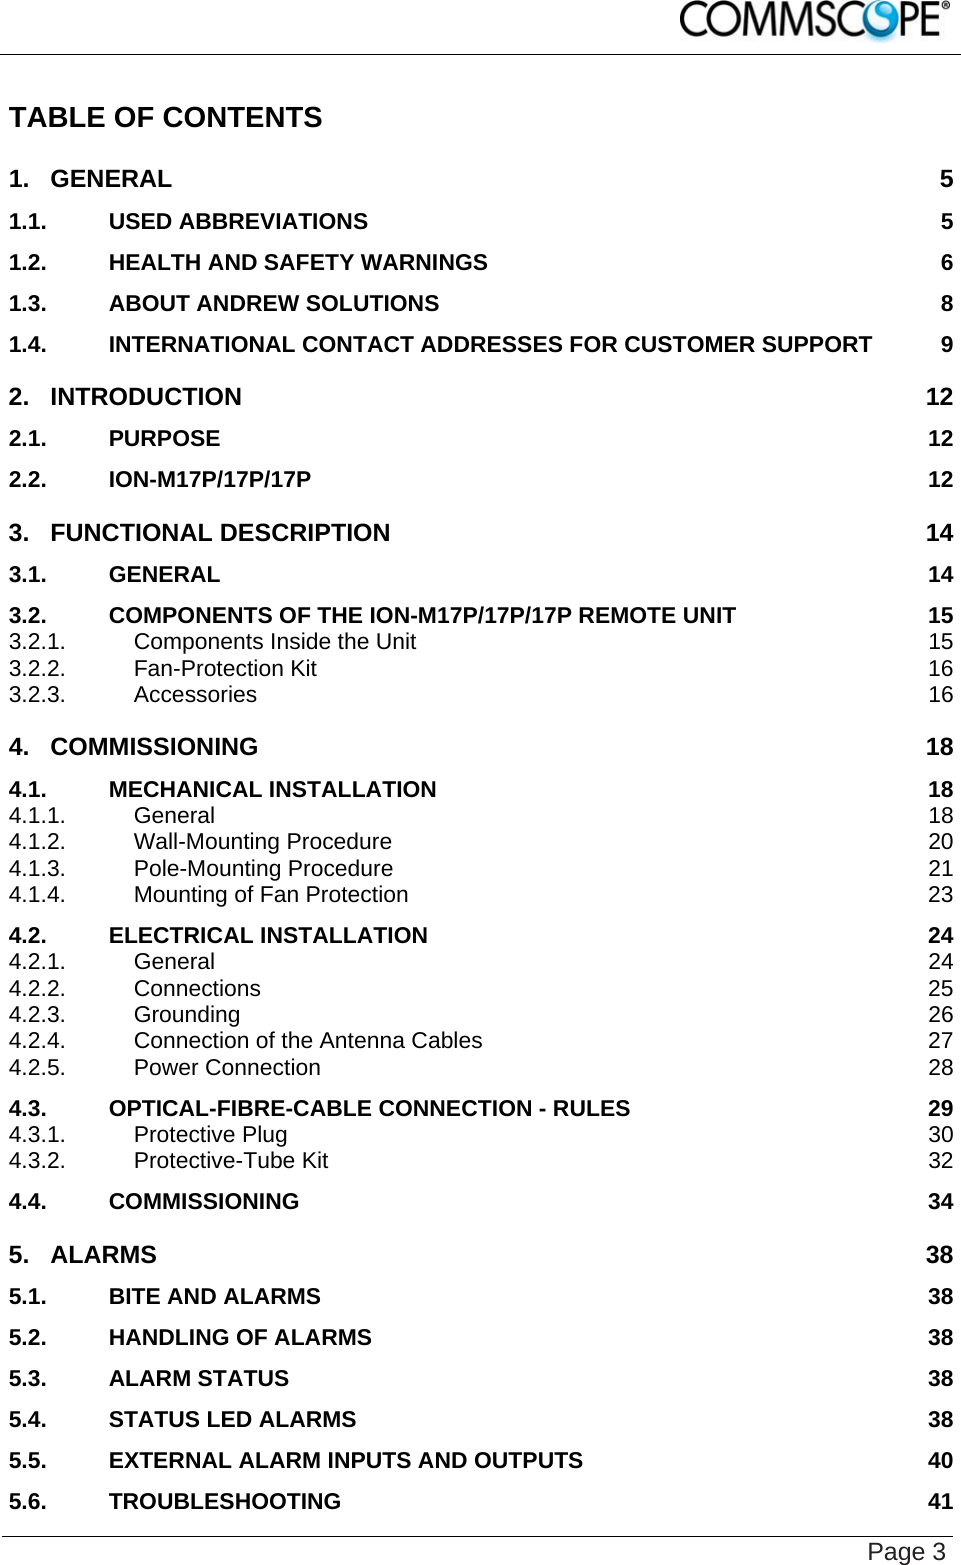    Page 3 TABLE OF CONTENTS 1. GENERAL 5 1.1. USED ABBREVIATIONS 5 1.2. HEALTH AND SAFETY WARNINGS 6 1.3. ABOUT ANDREW SOLUTIONS 8 1.4. INTERNATIONAL CONTACT ADDRESSES FOR CUSTOMER SUPPORT 9 2. INTRODUCTION 12 2.1. PURPOSE 12 2.2. ION-M17P/17P/17P 12 3. FUNCTIONAL DESCRIPTION 14 3.1. GENERAL 14 3.2. COMPONENTS OF THE ION-M17P/17P/17P REMOTE UNIT 15 3.2.1. Components Inside the Unit 15 3.2.2. Fan-Protection Kit 16 3.2.3. Accessories 16 4. COMMISSIONING 18 4.1. MECHANICAL INSTALLATION 18 4.1.1. General 18 4.1.2. Wall-Mounting Procedure 20 4.1.3. Pole-Mounting Procedure 21 4.1.4. Mounting of Fan Protection 23 4.2. ELECTRICAL INSTALLATION 24 4.2.1. General 24 4.2.2. Connections 25 4.2.3. Grounding 26 4.2.4. Connection of the Antenna Cables 27 4.2.5. Power Connection 28 4.3. OPTICAL-FIBRE-CABLE CONNECTION - RULES 29 4.3.1. Protective Plug 30 4.3.2. Protective-Tube Kit 32 4.4. COMMISSIONING 34 5. ALARMS 38 5.1. BITE AND ALARMS 38 5.2. HANDLING OF ALARMS 38 5.3. ALARM STATUS 38 5.4. STATUS LED ALARMS 38 5.5. EXTERNAL ALARM INPUTS AND OUTPUTS 40 5.6. TROUBLESHOOTING 41 